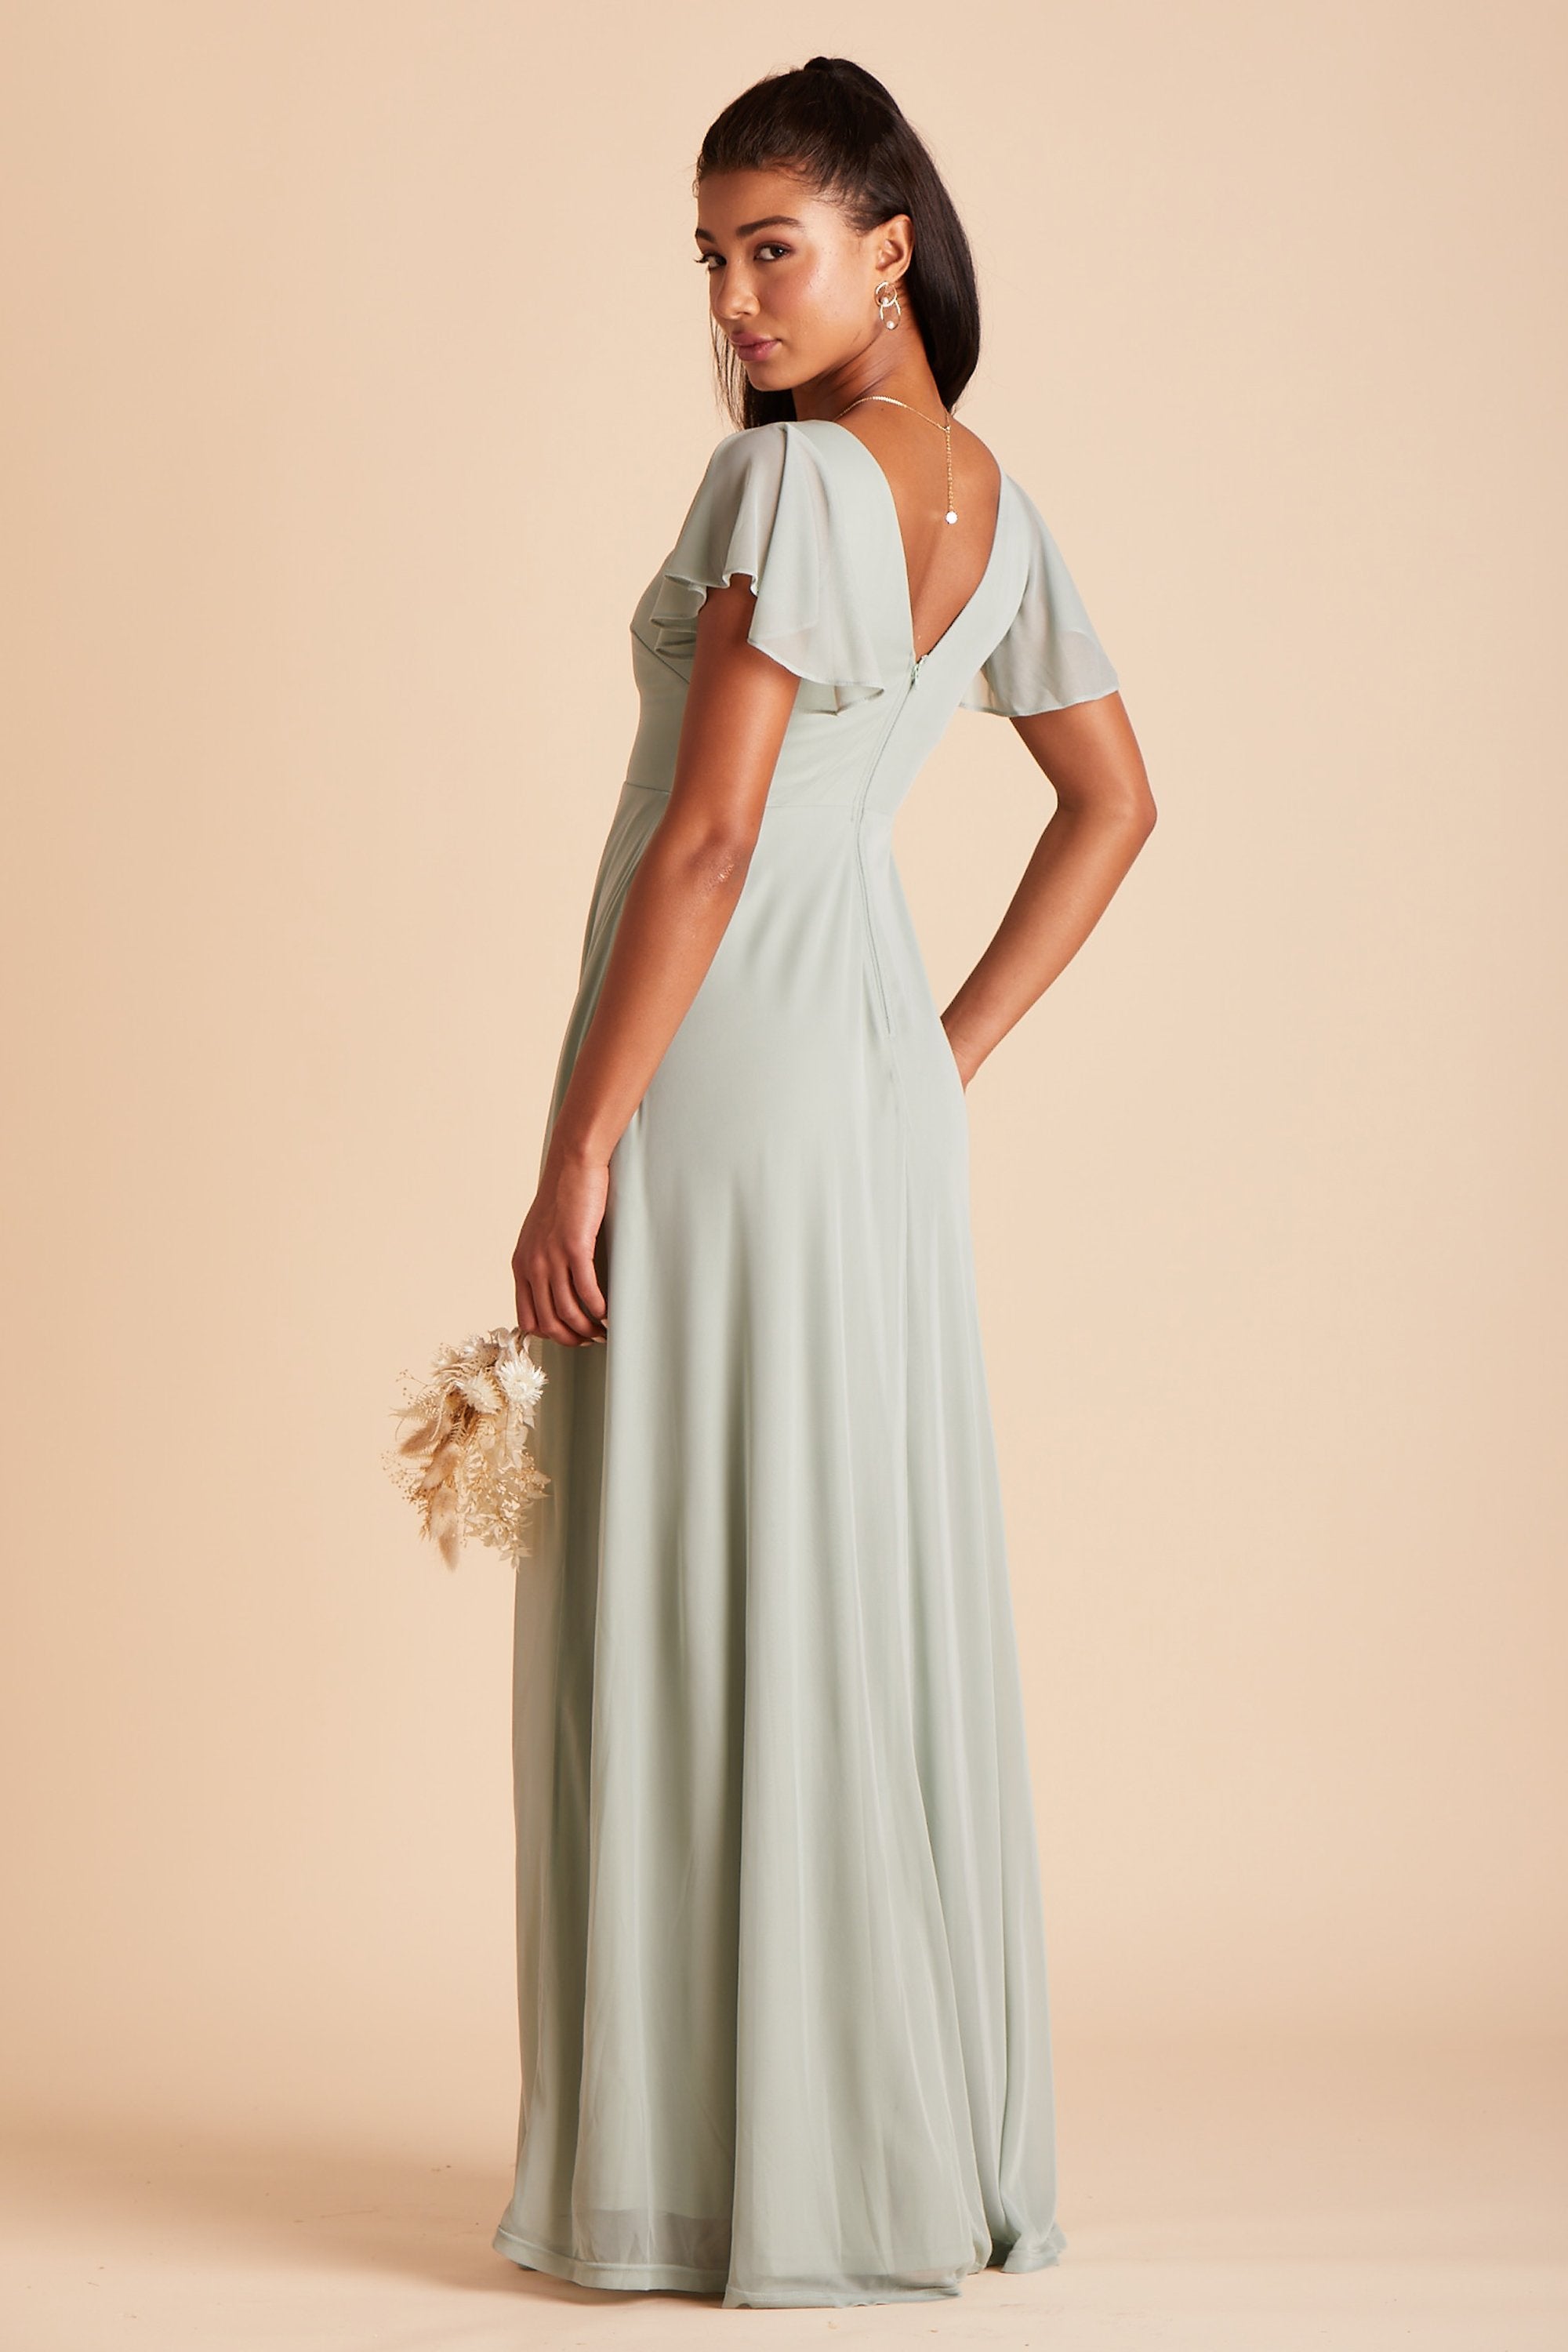 Hannah bridesmaids dress in sage green mesh by Birdy Grey, side view